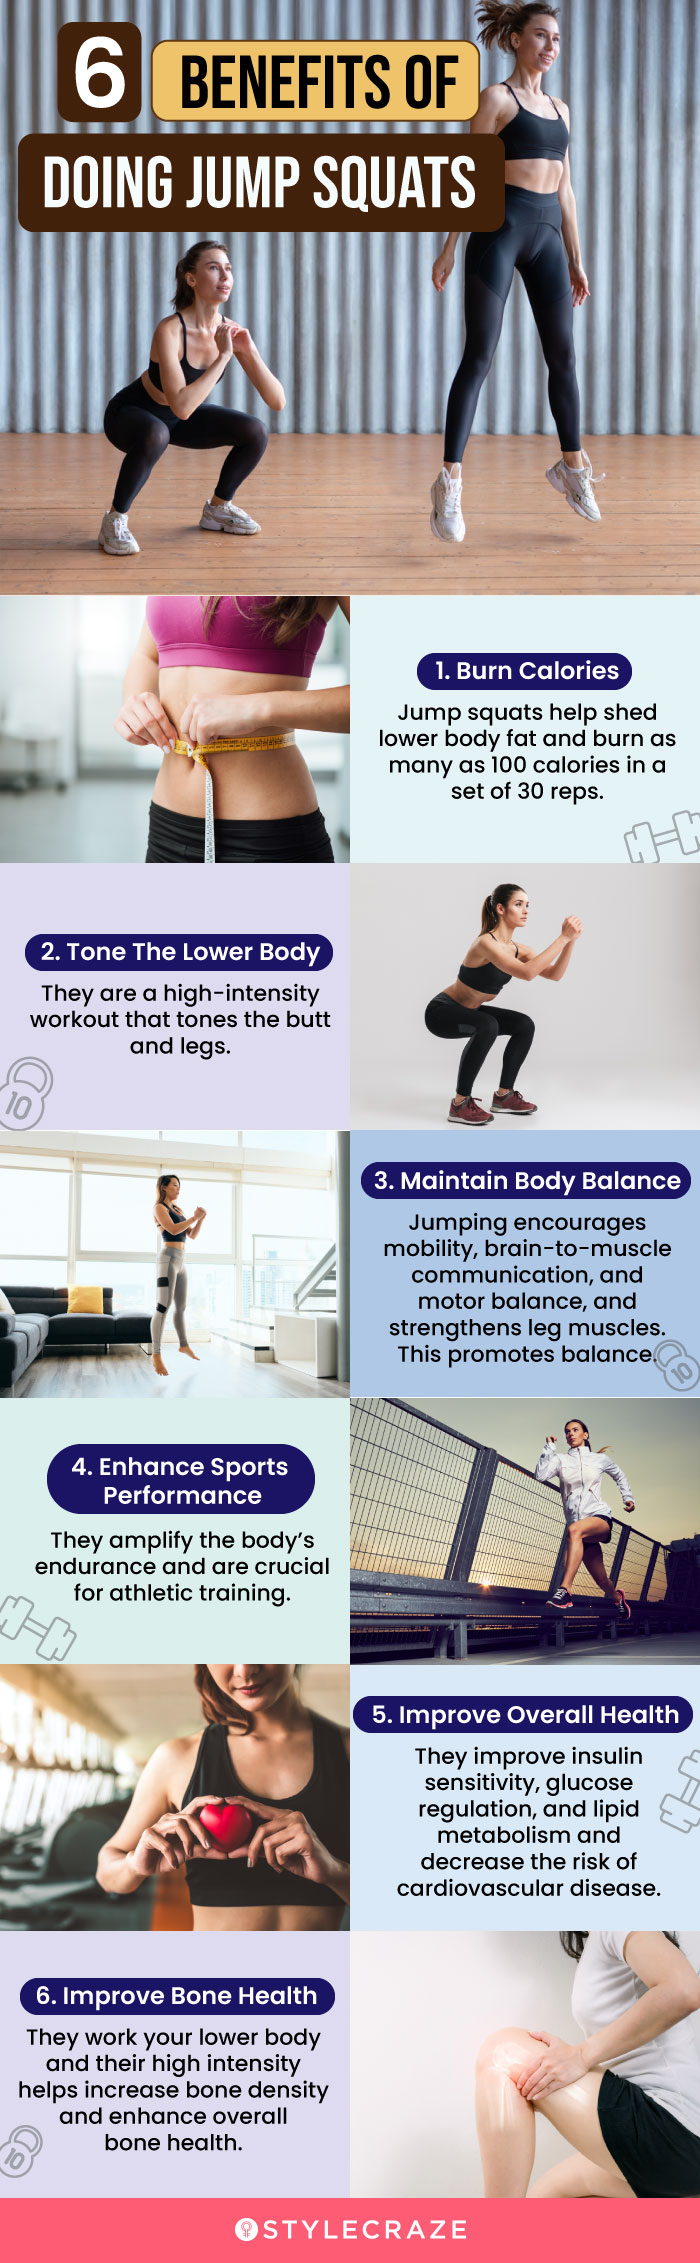 6 benefits of doing jump squats (infographic)